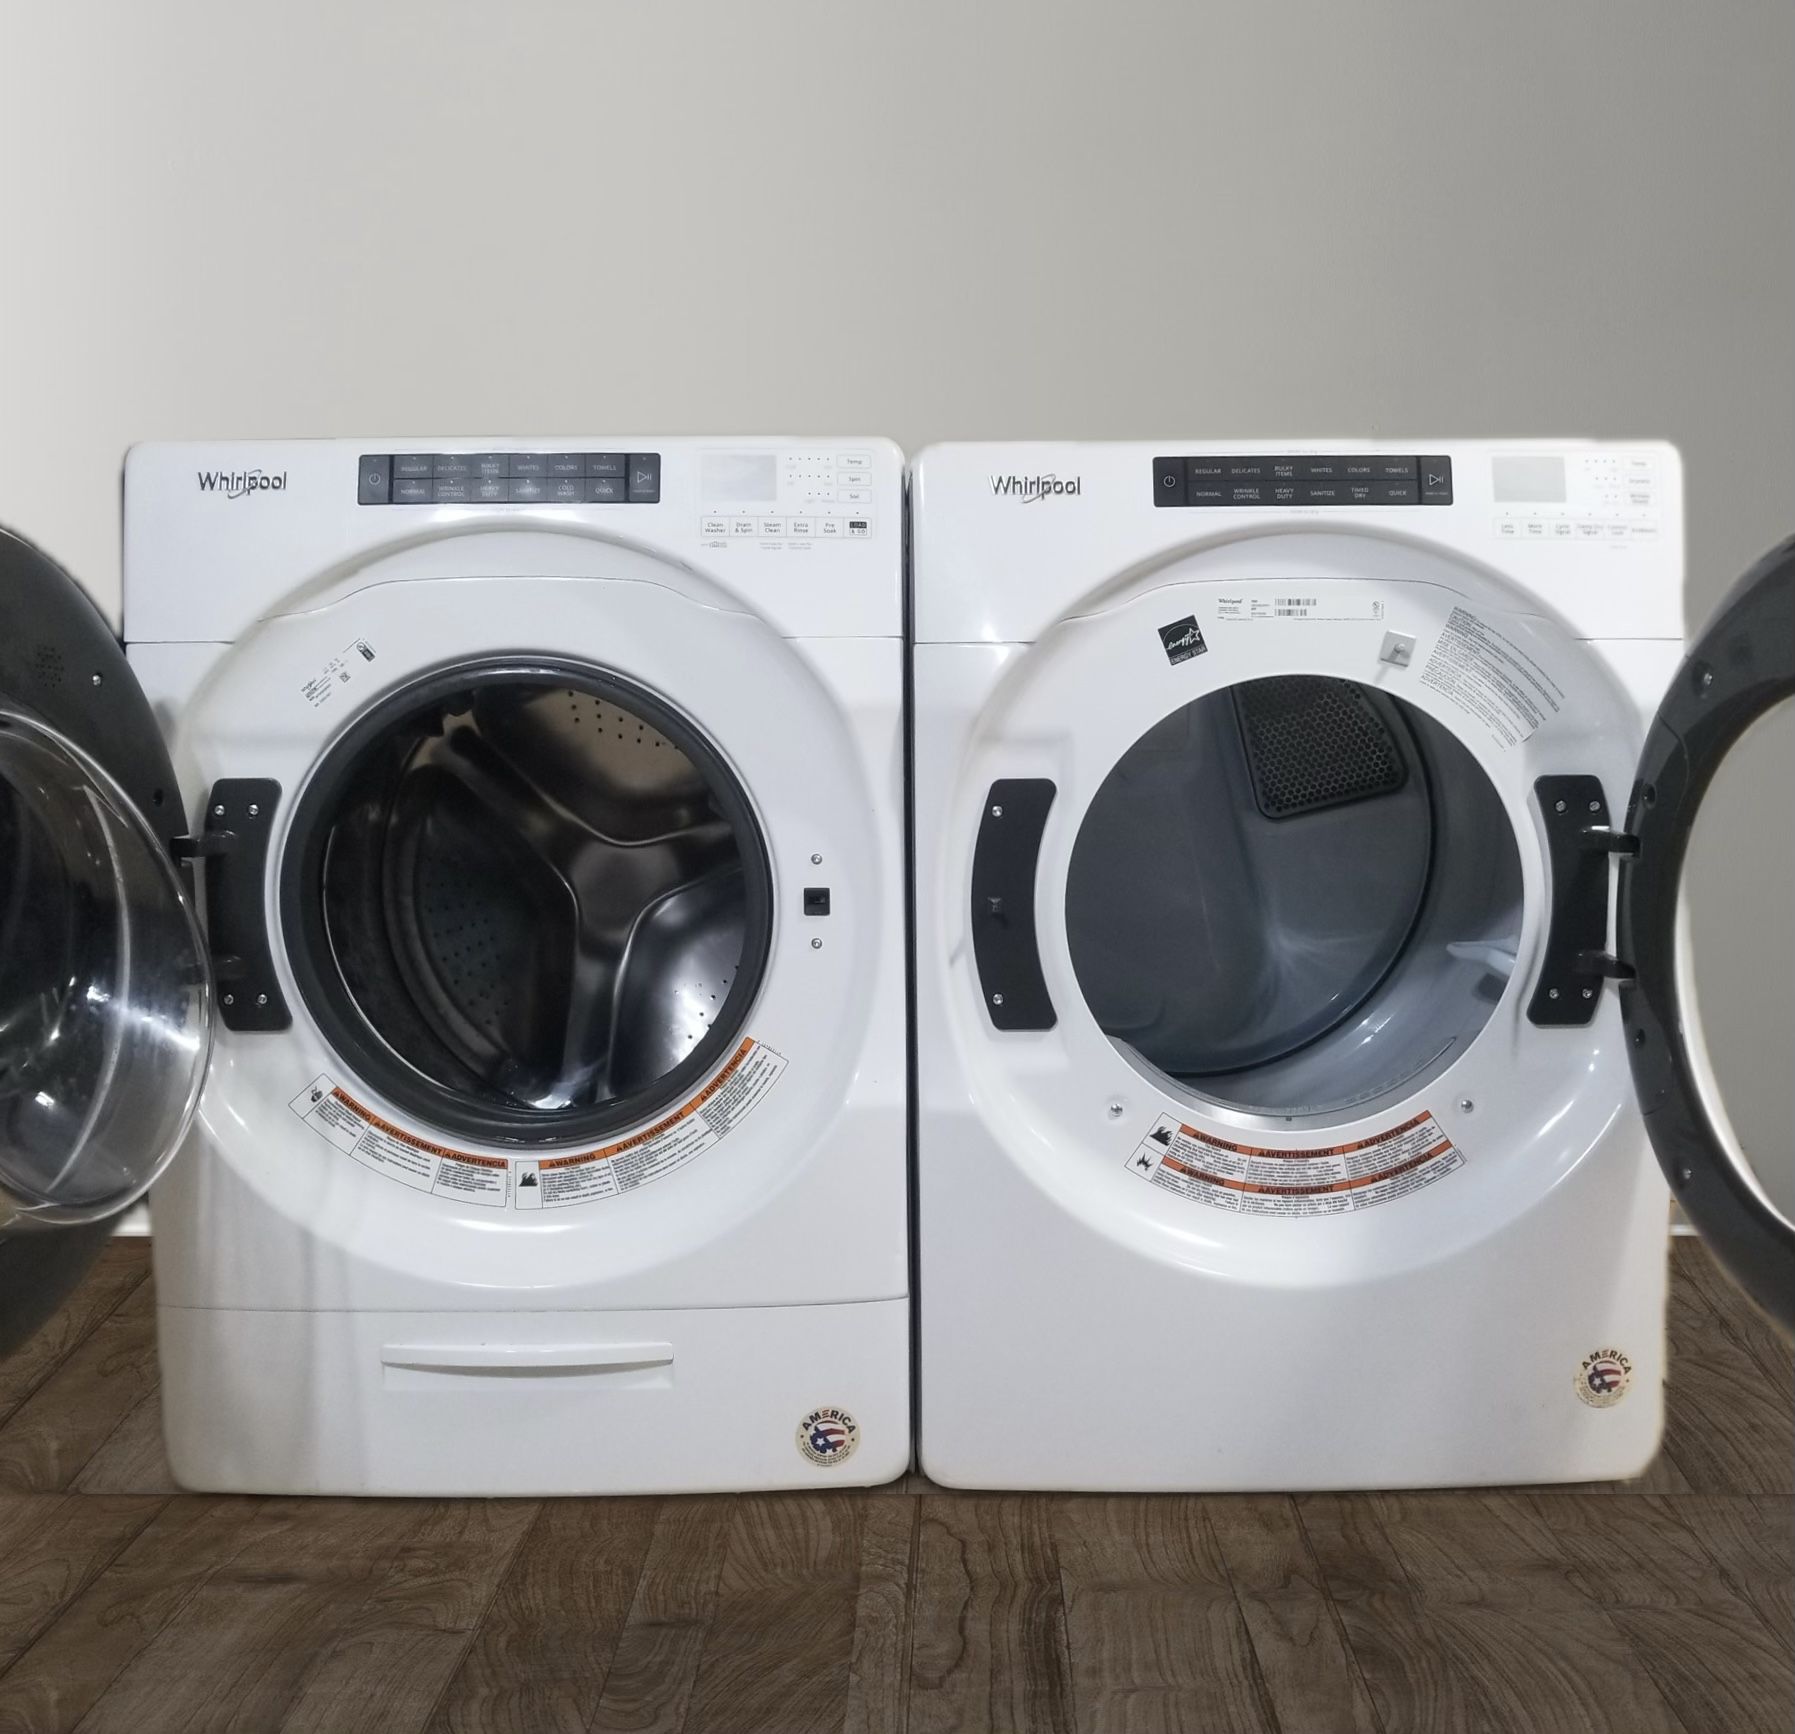 🎊6 Months Warranty🎊 Front Load Whirlpool Washer And Electric Dryer